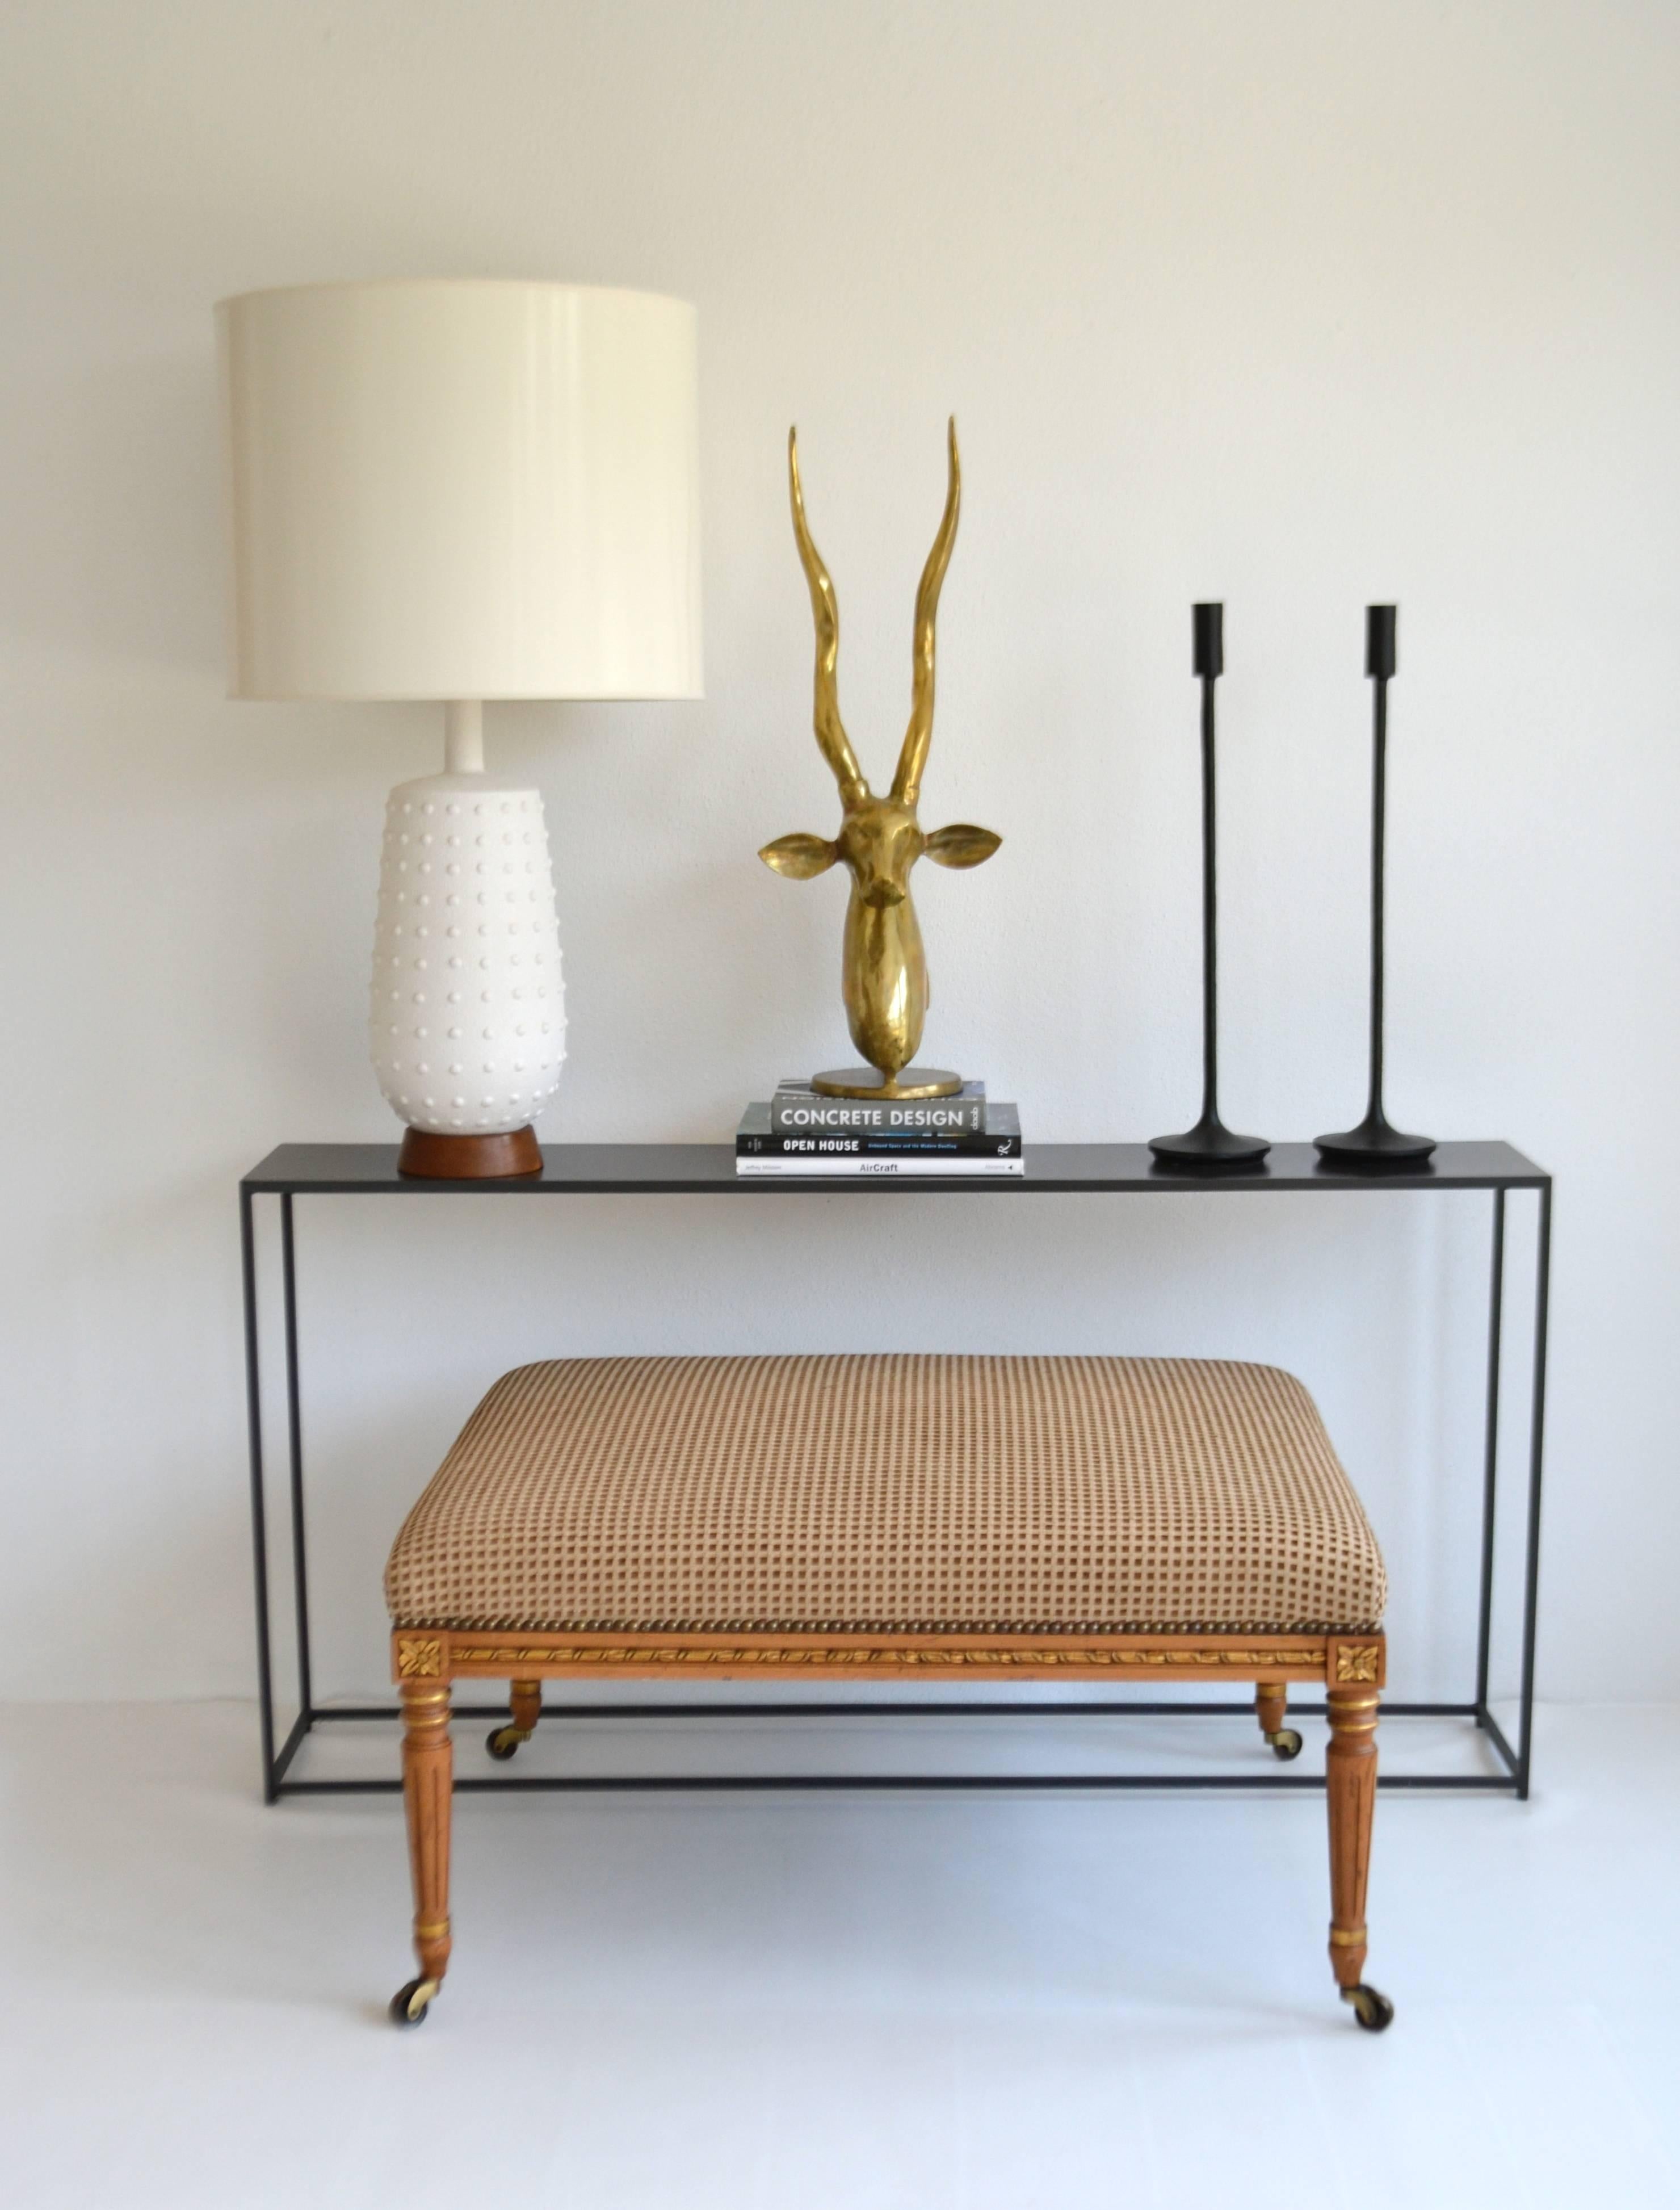 Mid-Century lava glazed jar form table lamp, circa 1950s-1960s. This sculptural ceramic white glazed lamp with elongated neck is mounted on a turned walnut base and wired with brass fittings. 
Shade not included:
Measurements:
Overall: 36